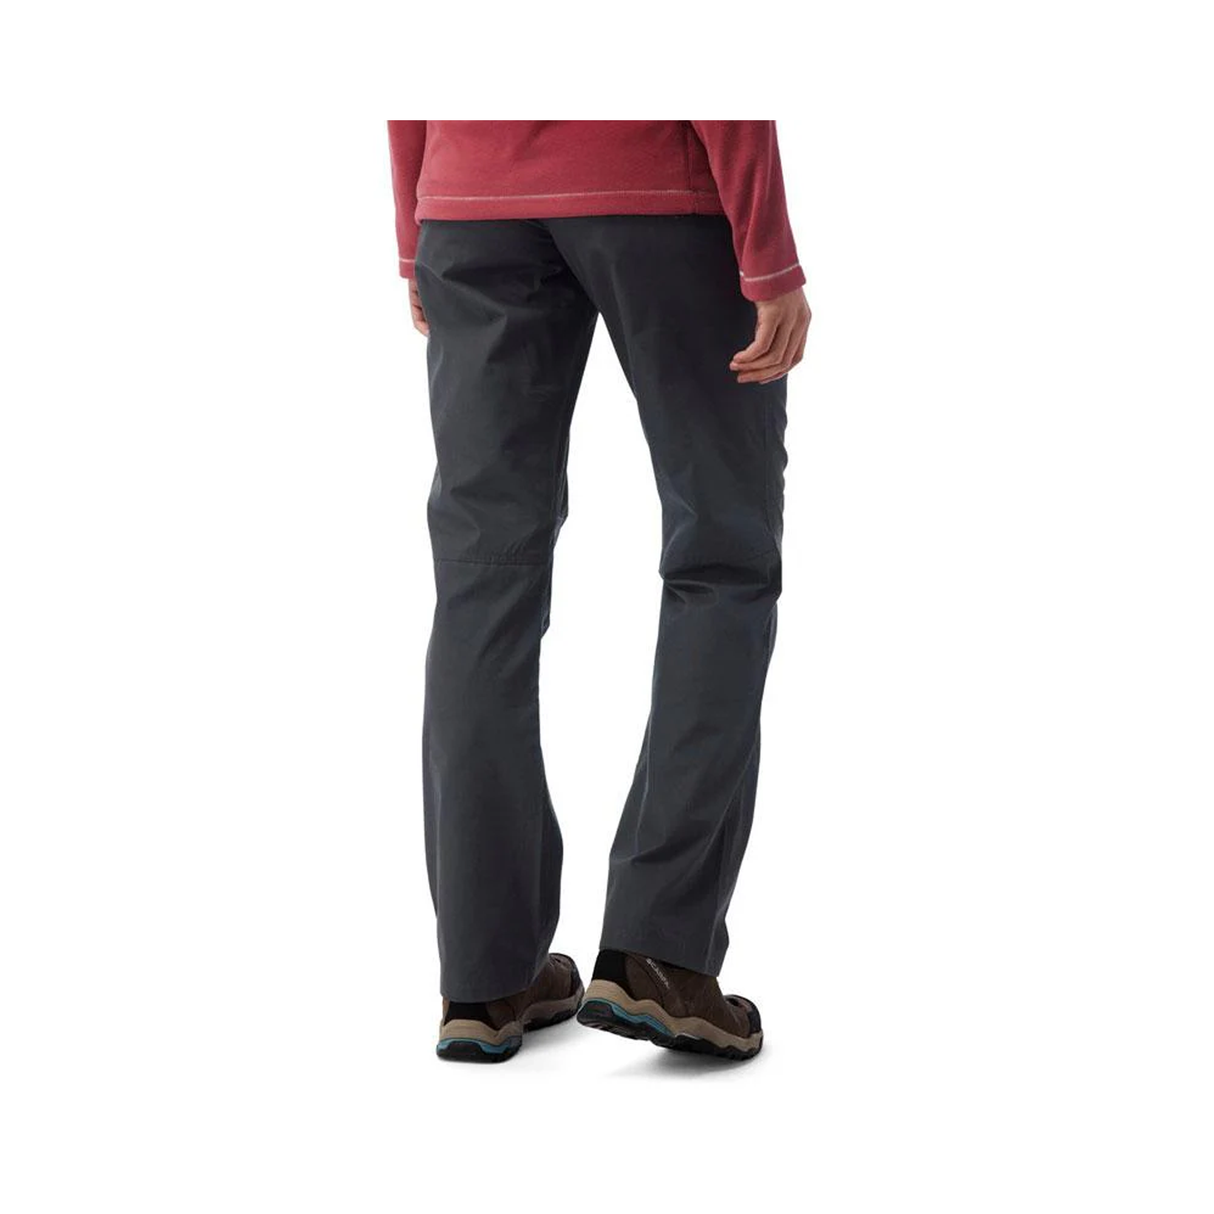 Craghoppers Womens C65 Lightweight Walking Trousers